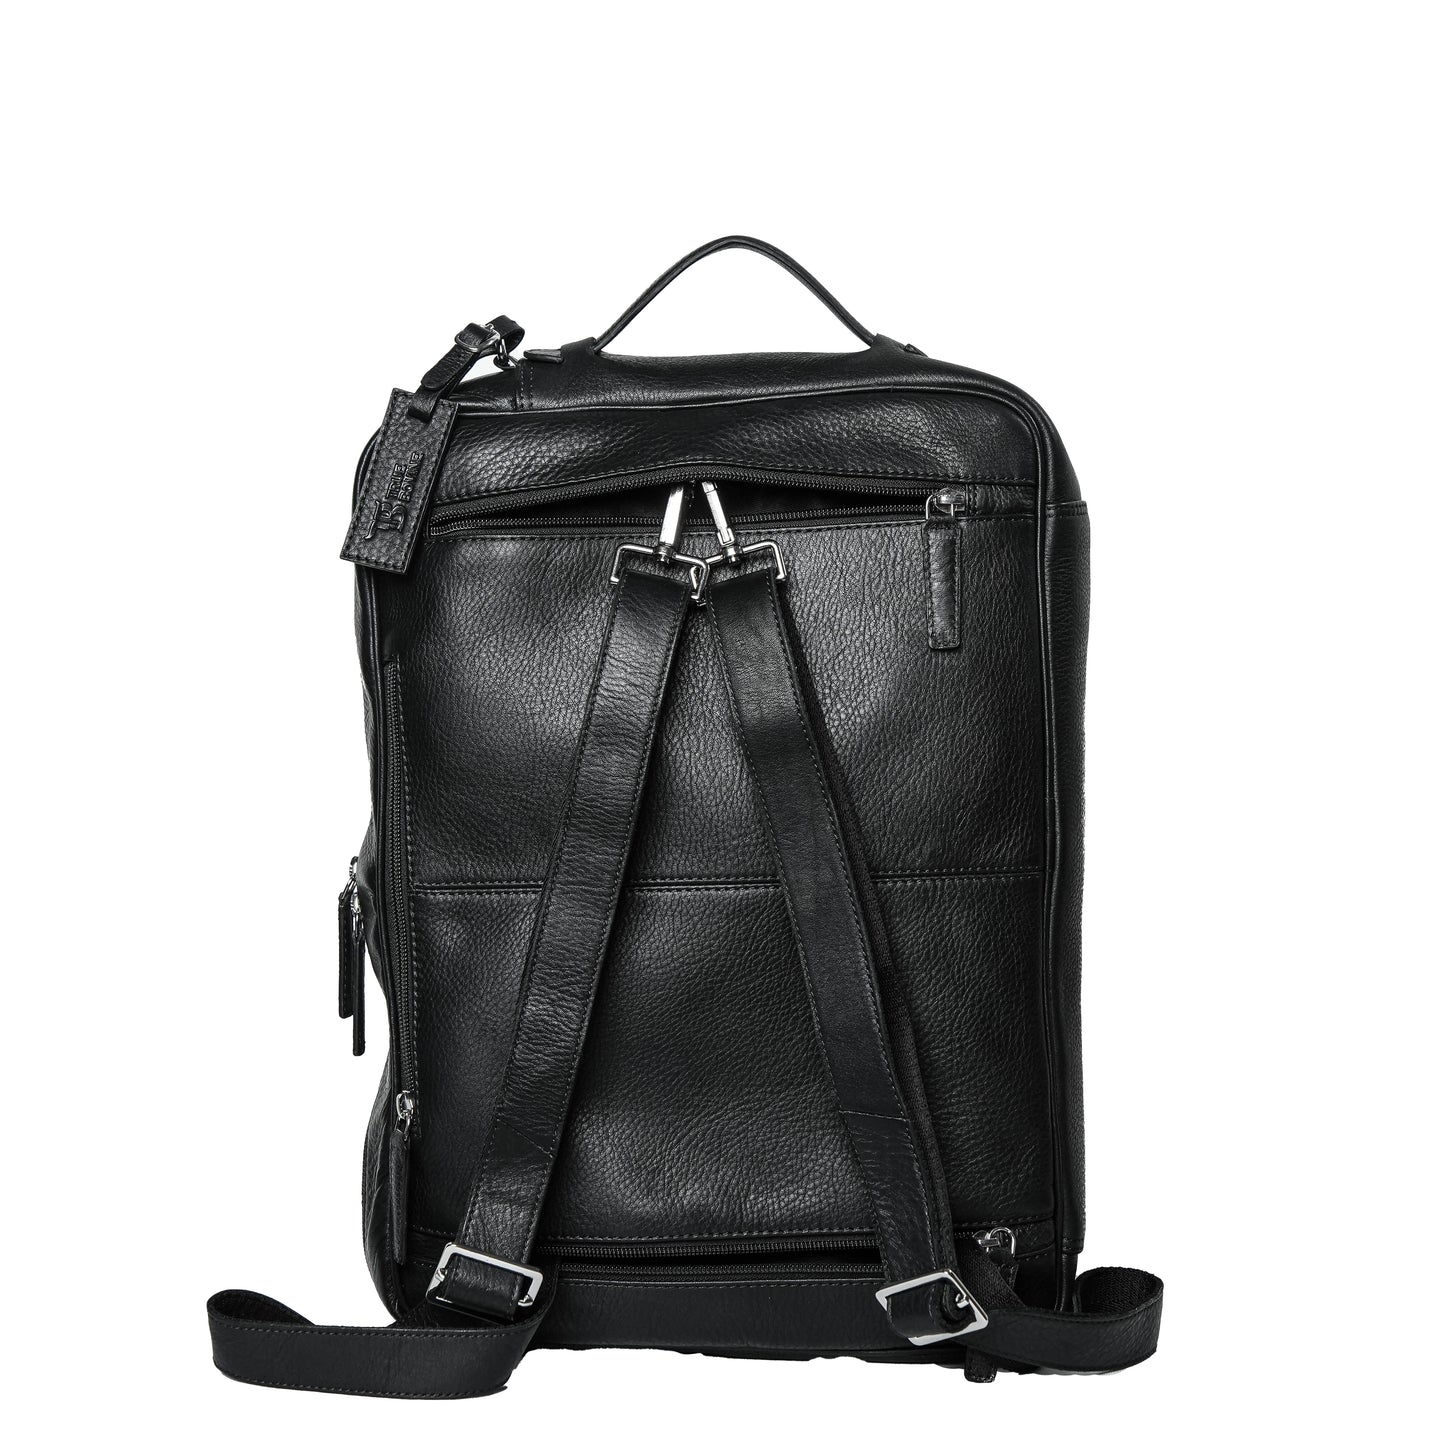 Terry 2 in 1 Convertible Laptop Backpack.